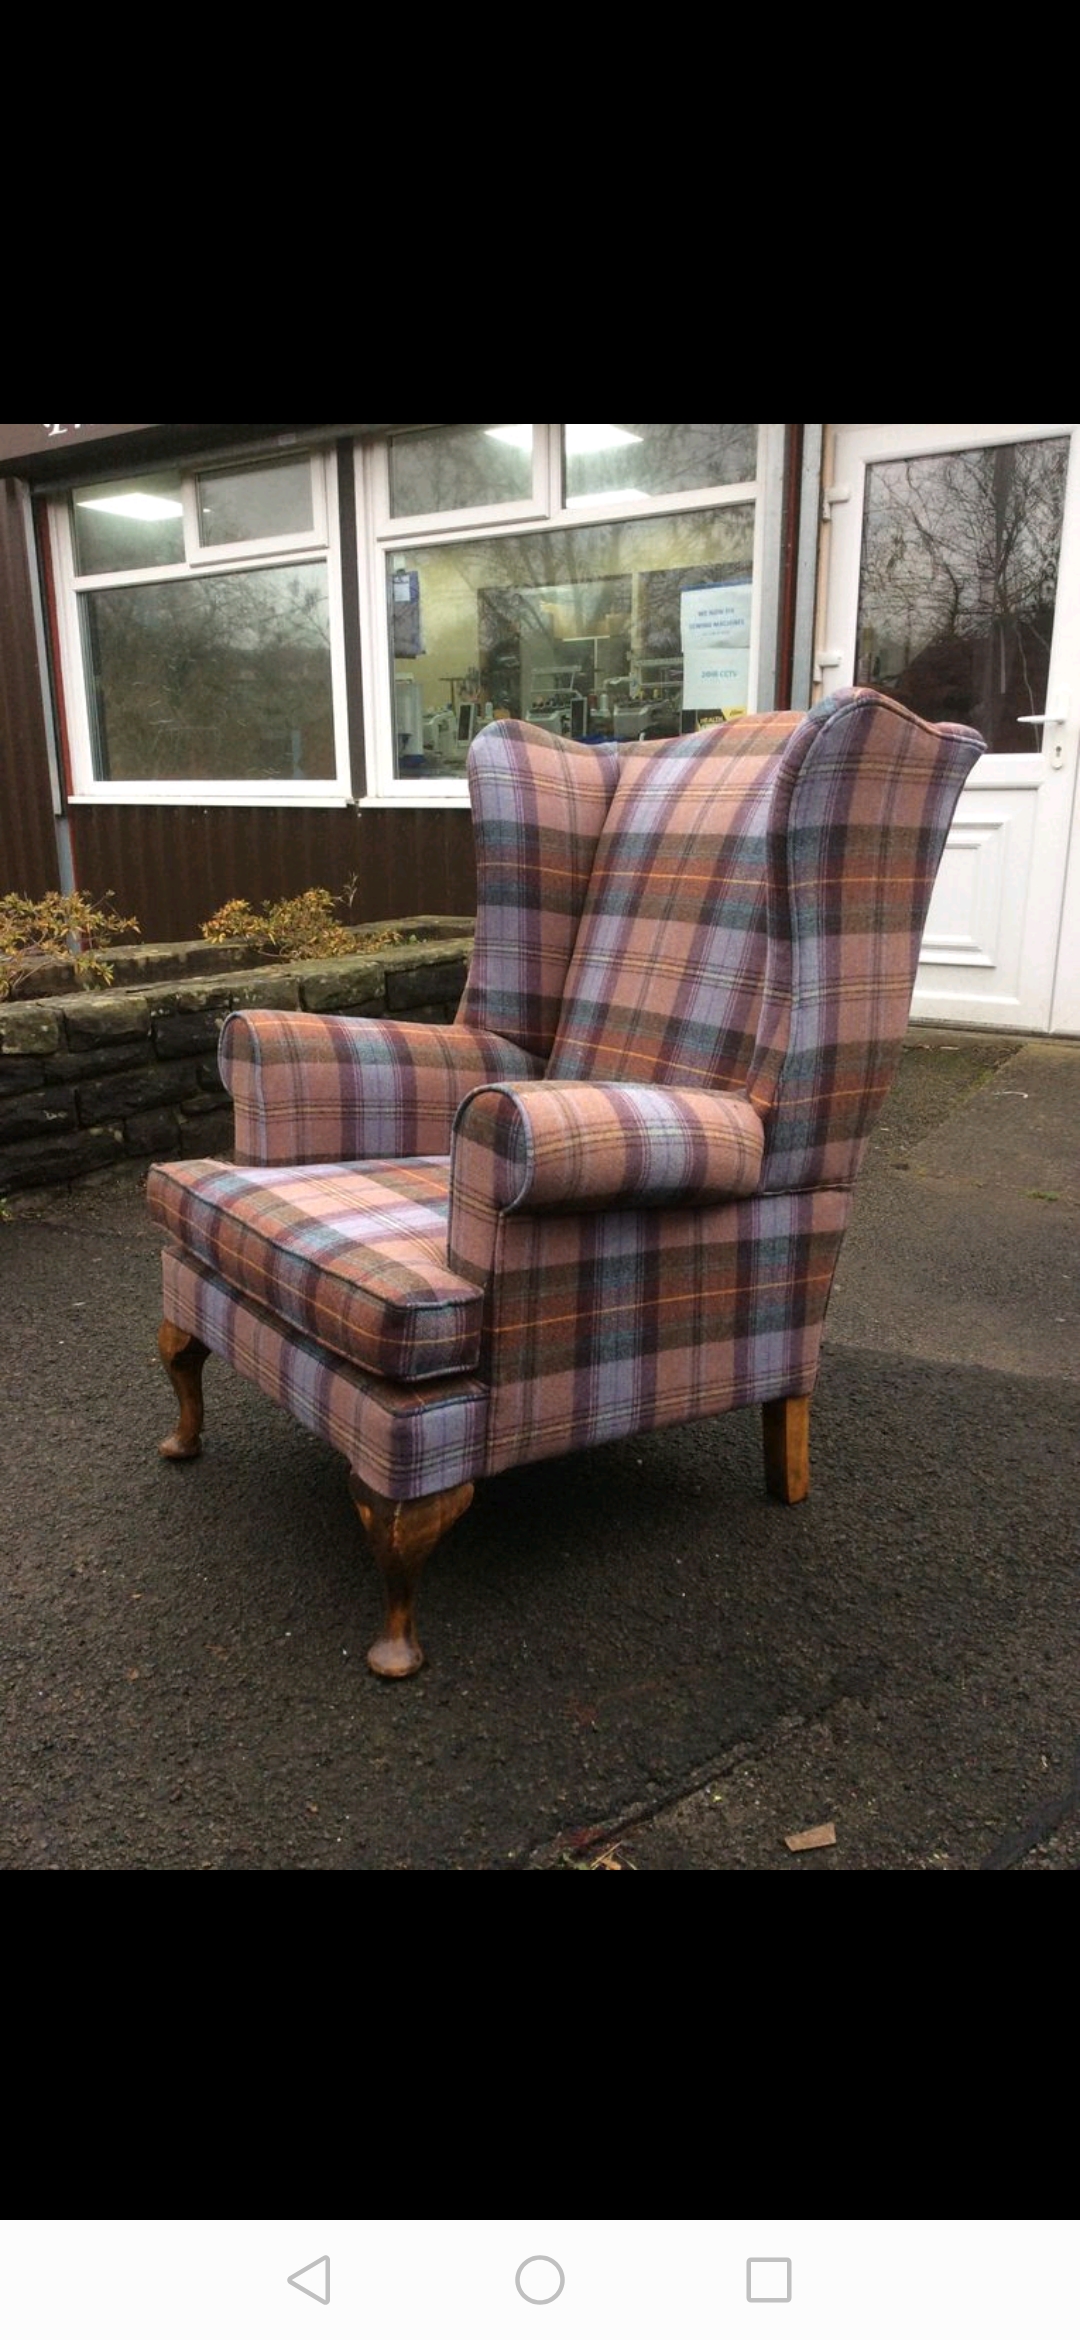 A1 Unique Upholstery - Upholstery 30